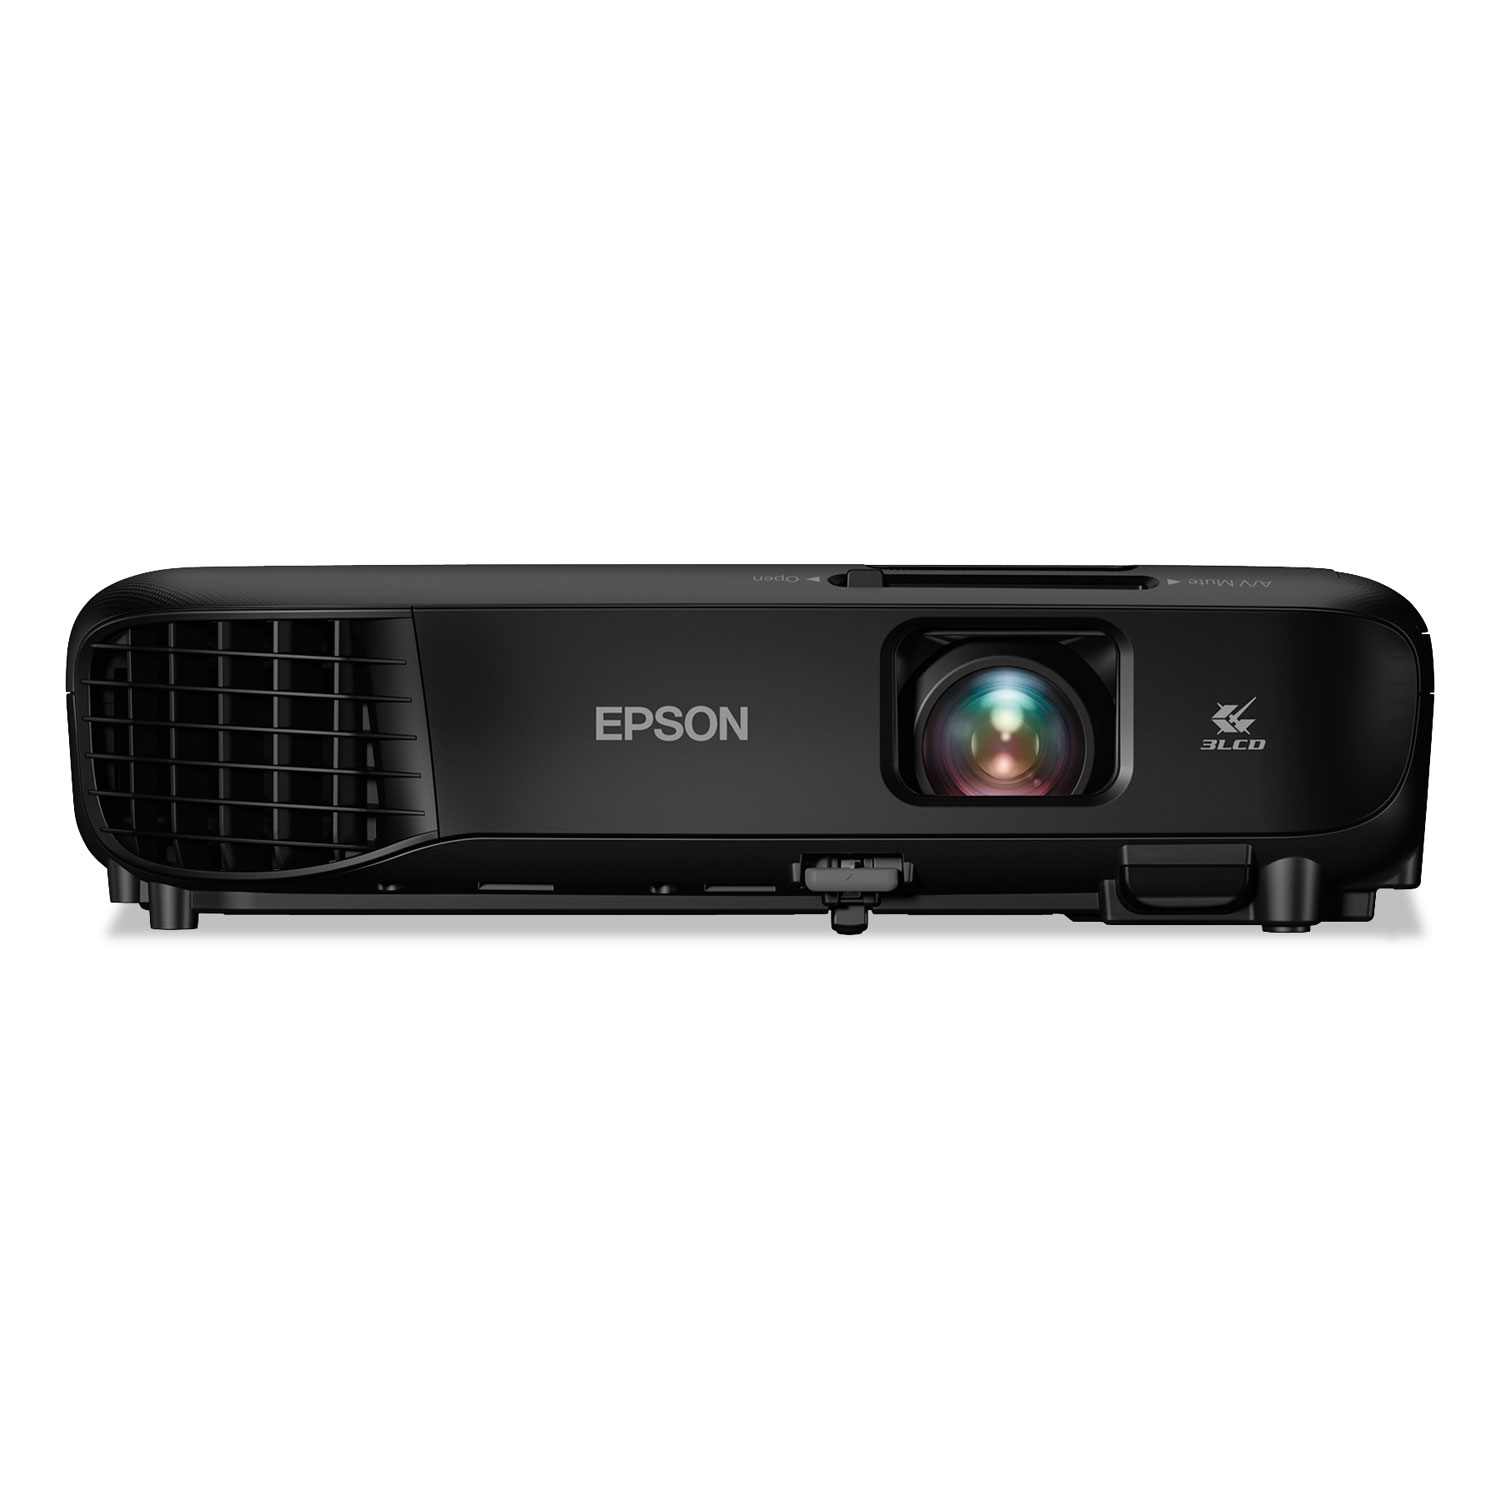 Powerlite 1266 Wireless 3lcd Projector 3600 Lm 1280 X 800 Pixels 1 2x Zoom United Imaging